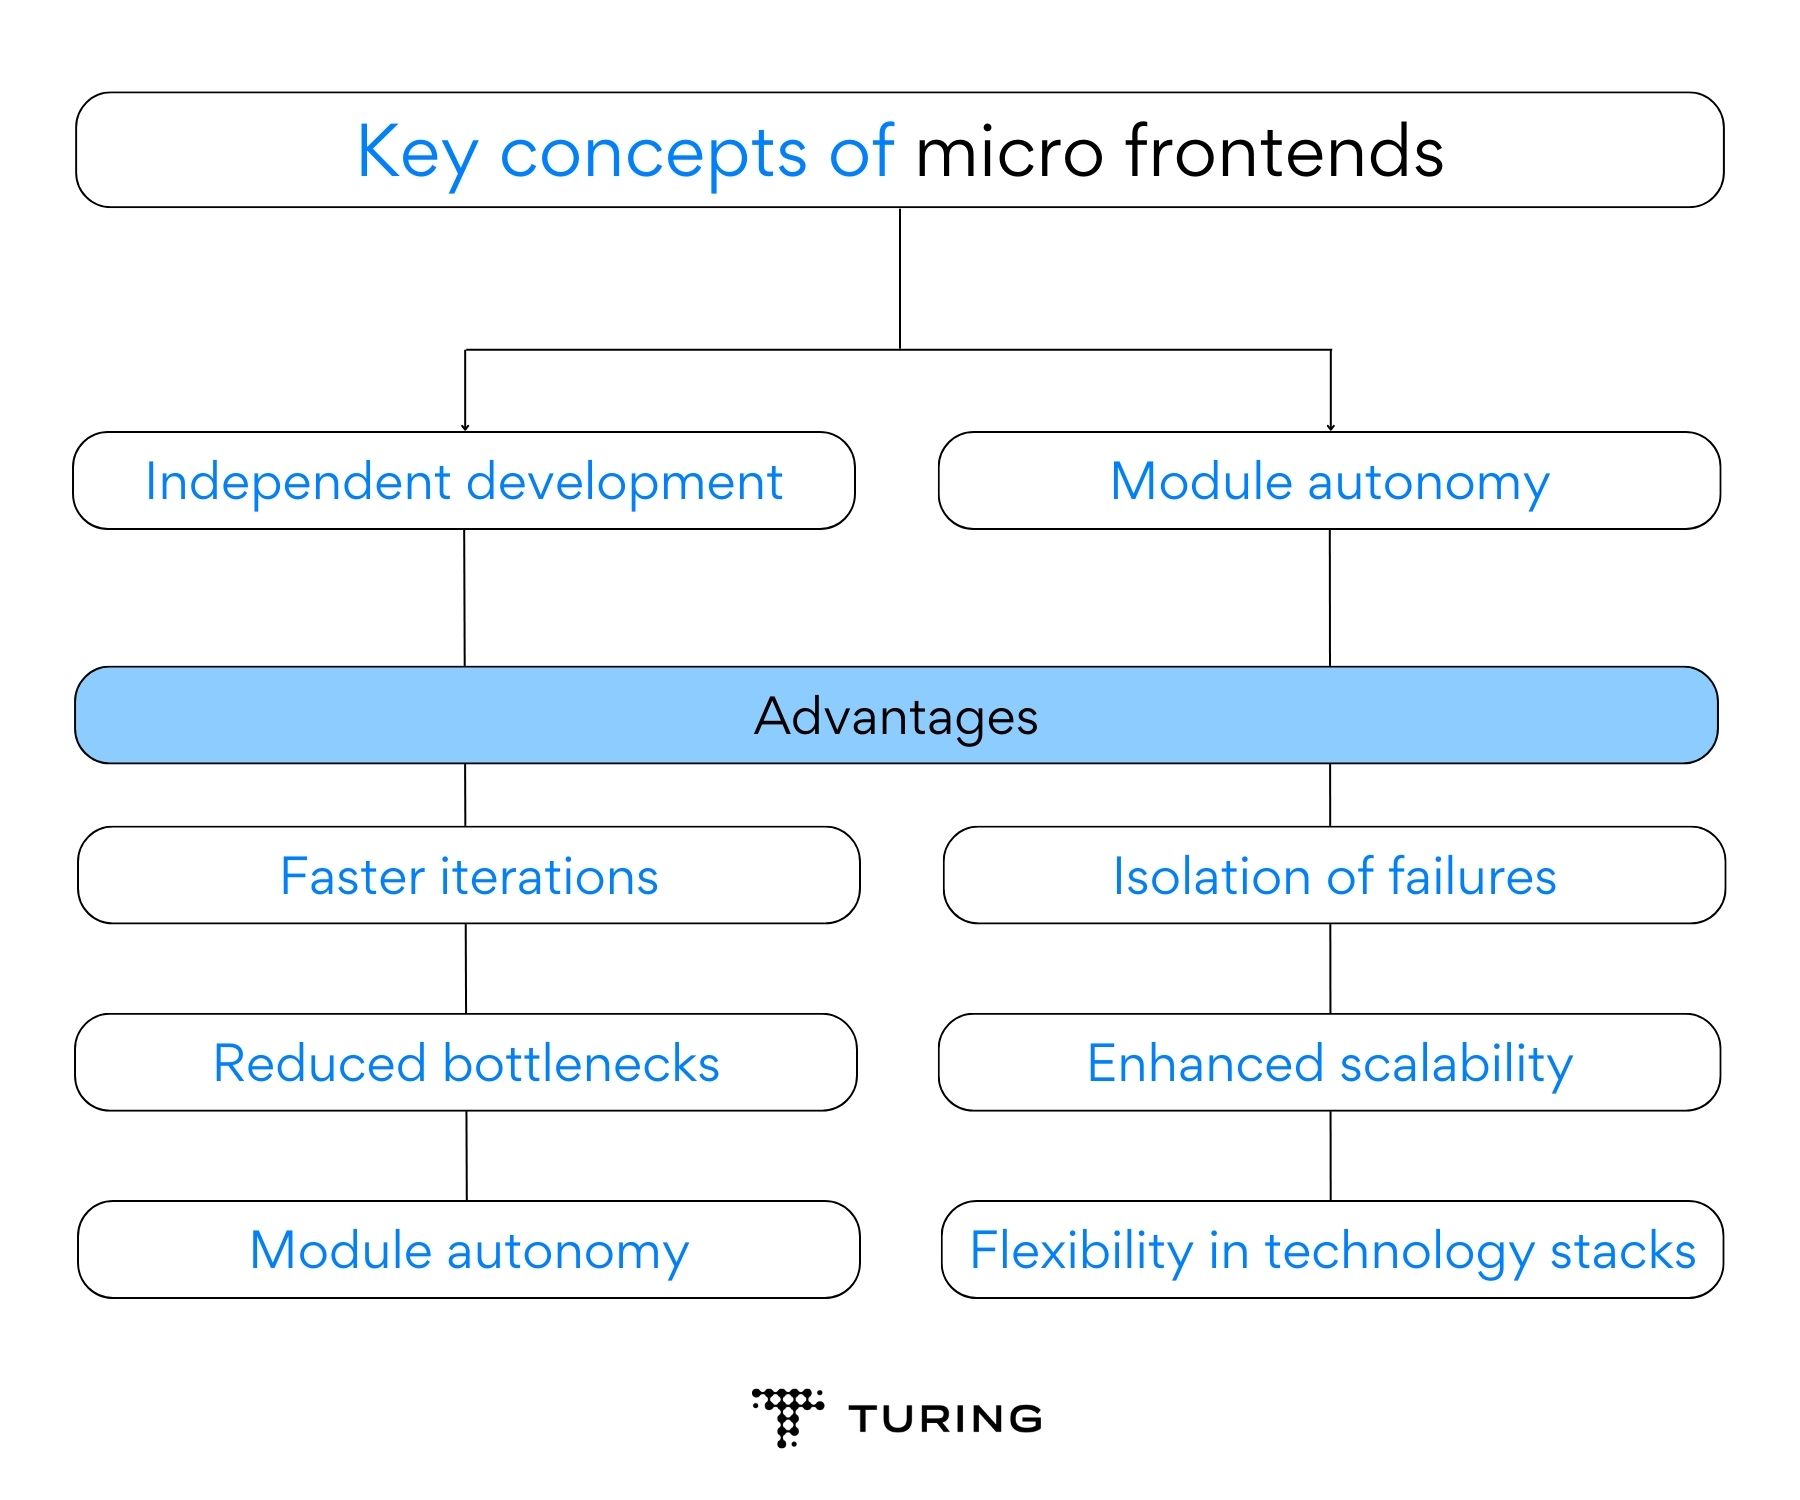 Key concepts of micro frontends